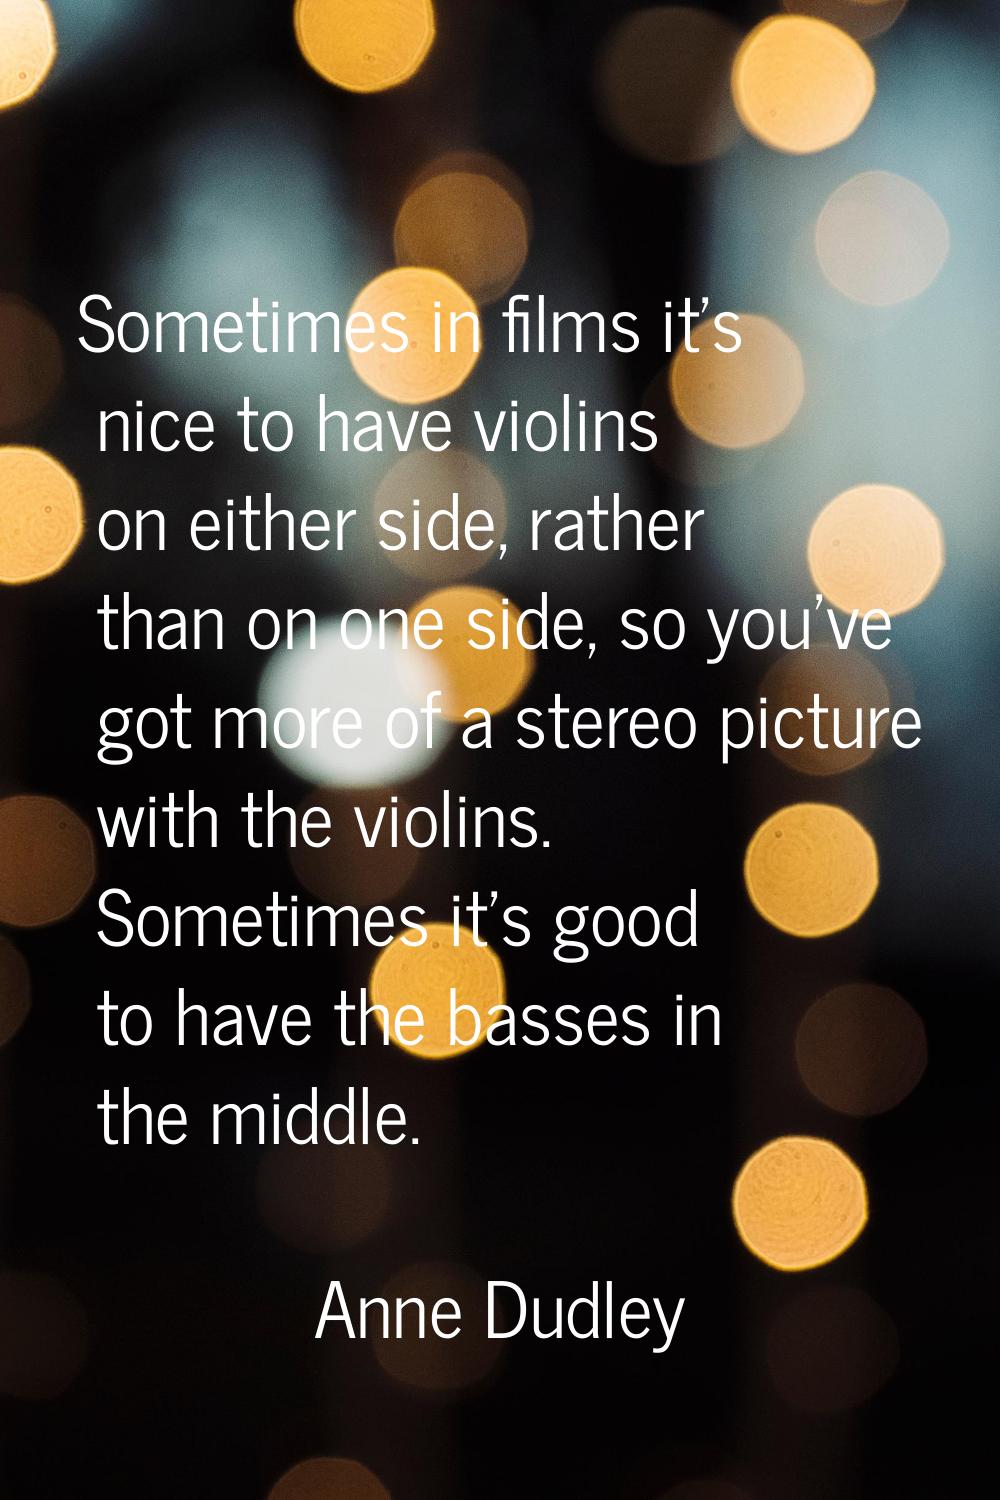 Sometimes in films it's nice to have violins on either side, rather than on one side, so you've got